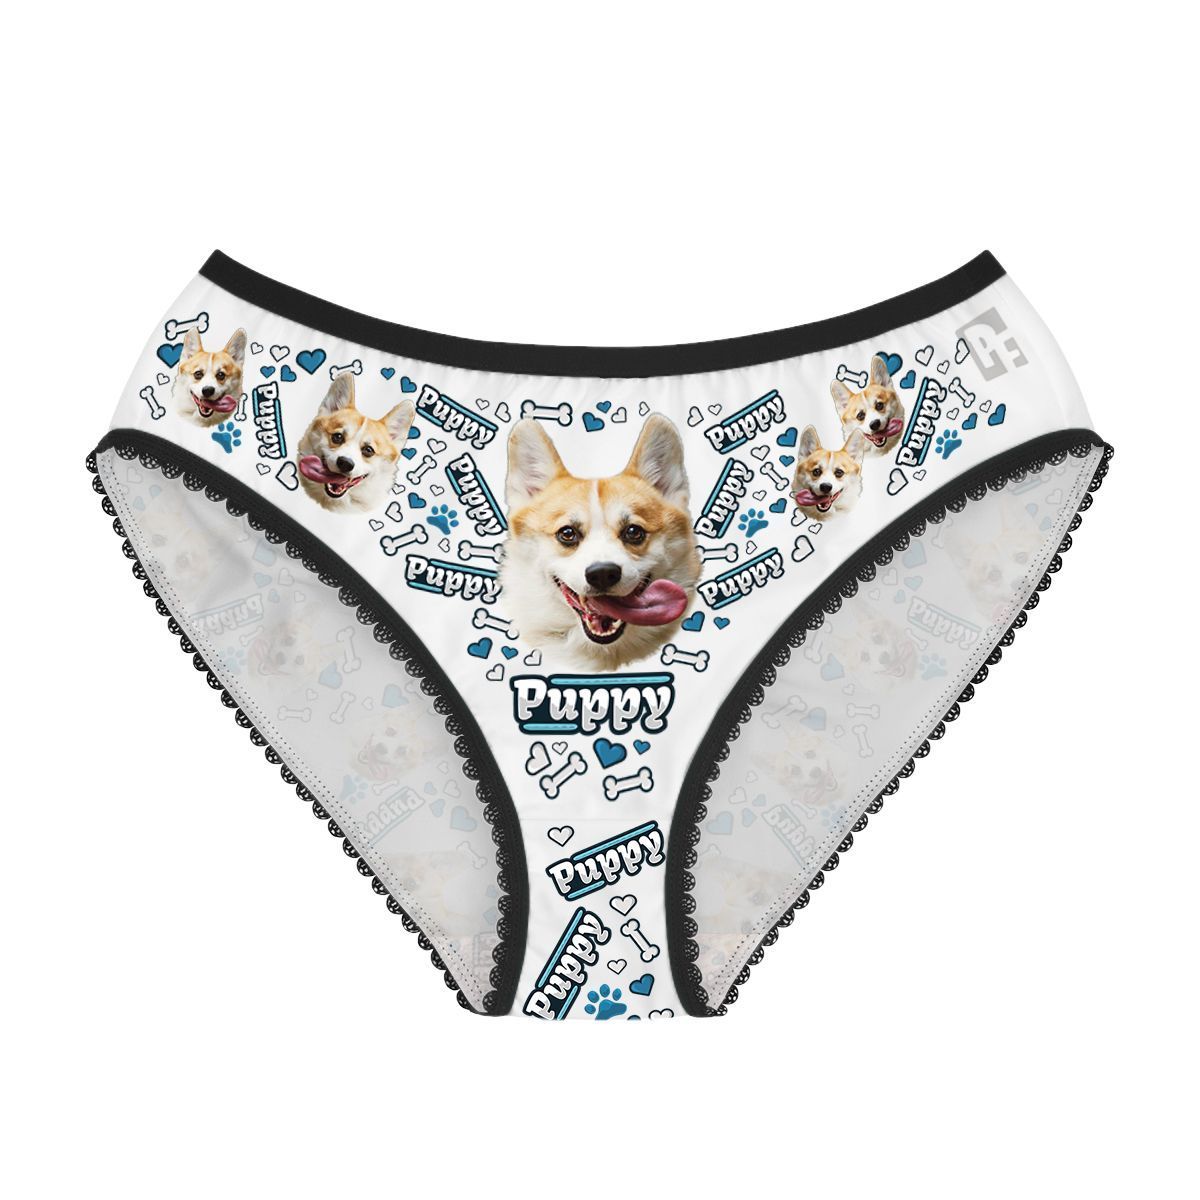 White Puppy women's underwear briefs personalized with photo printed on them